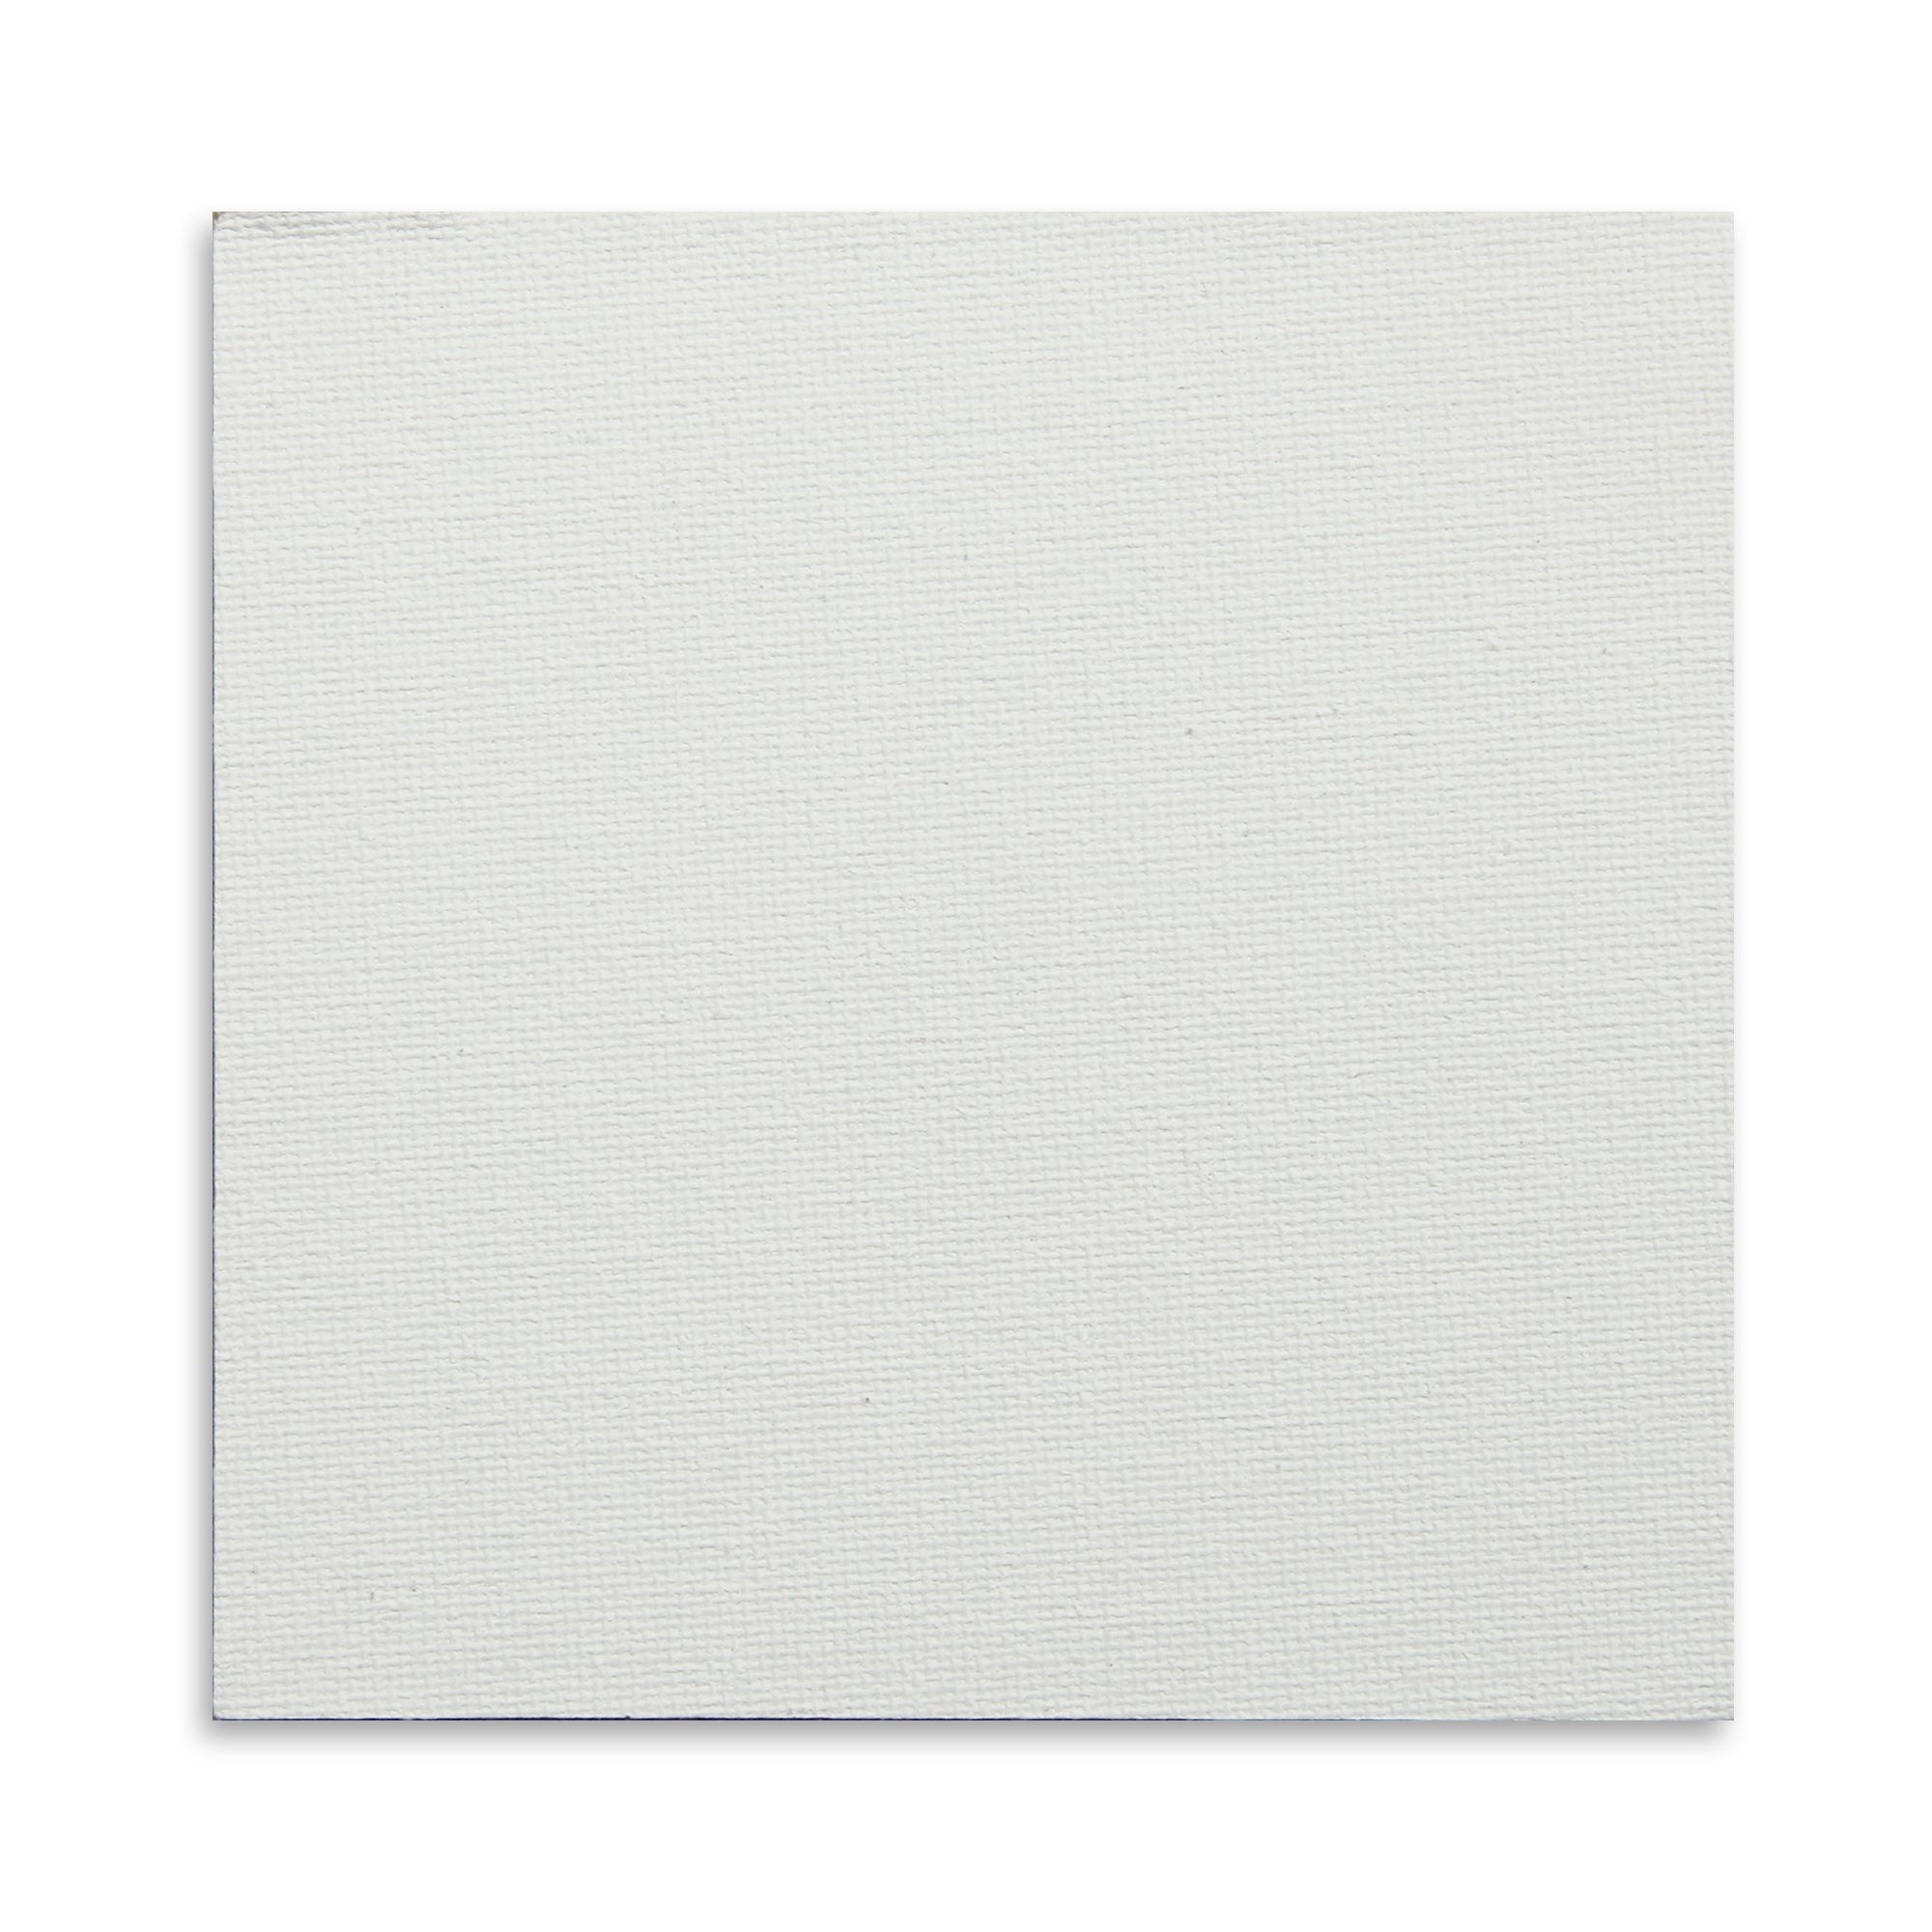 Canvas Board Square 12 X 12Inch 230Gsm 2Mm Thick 4Pc Shrink Lb